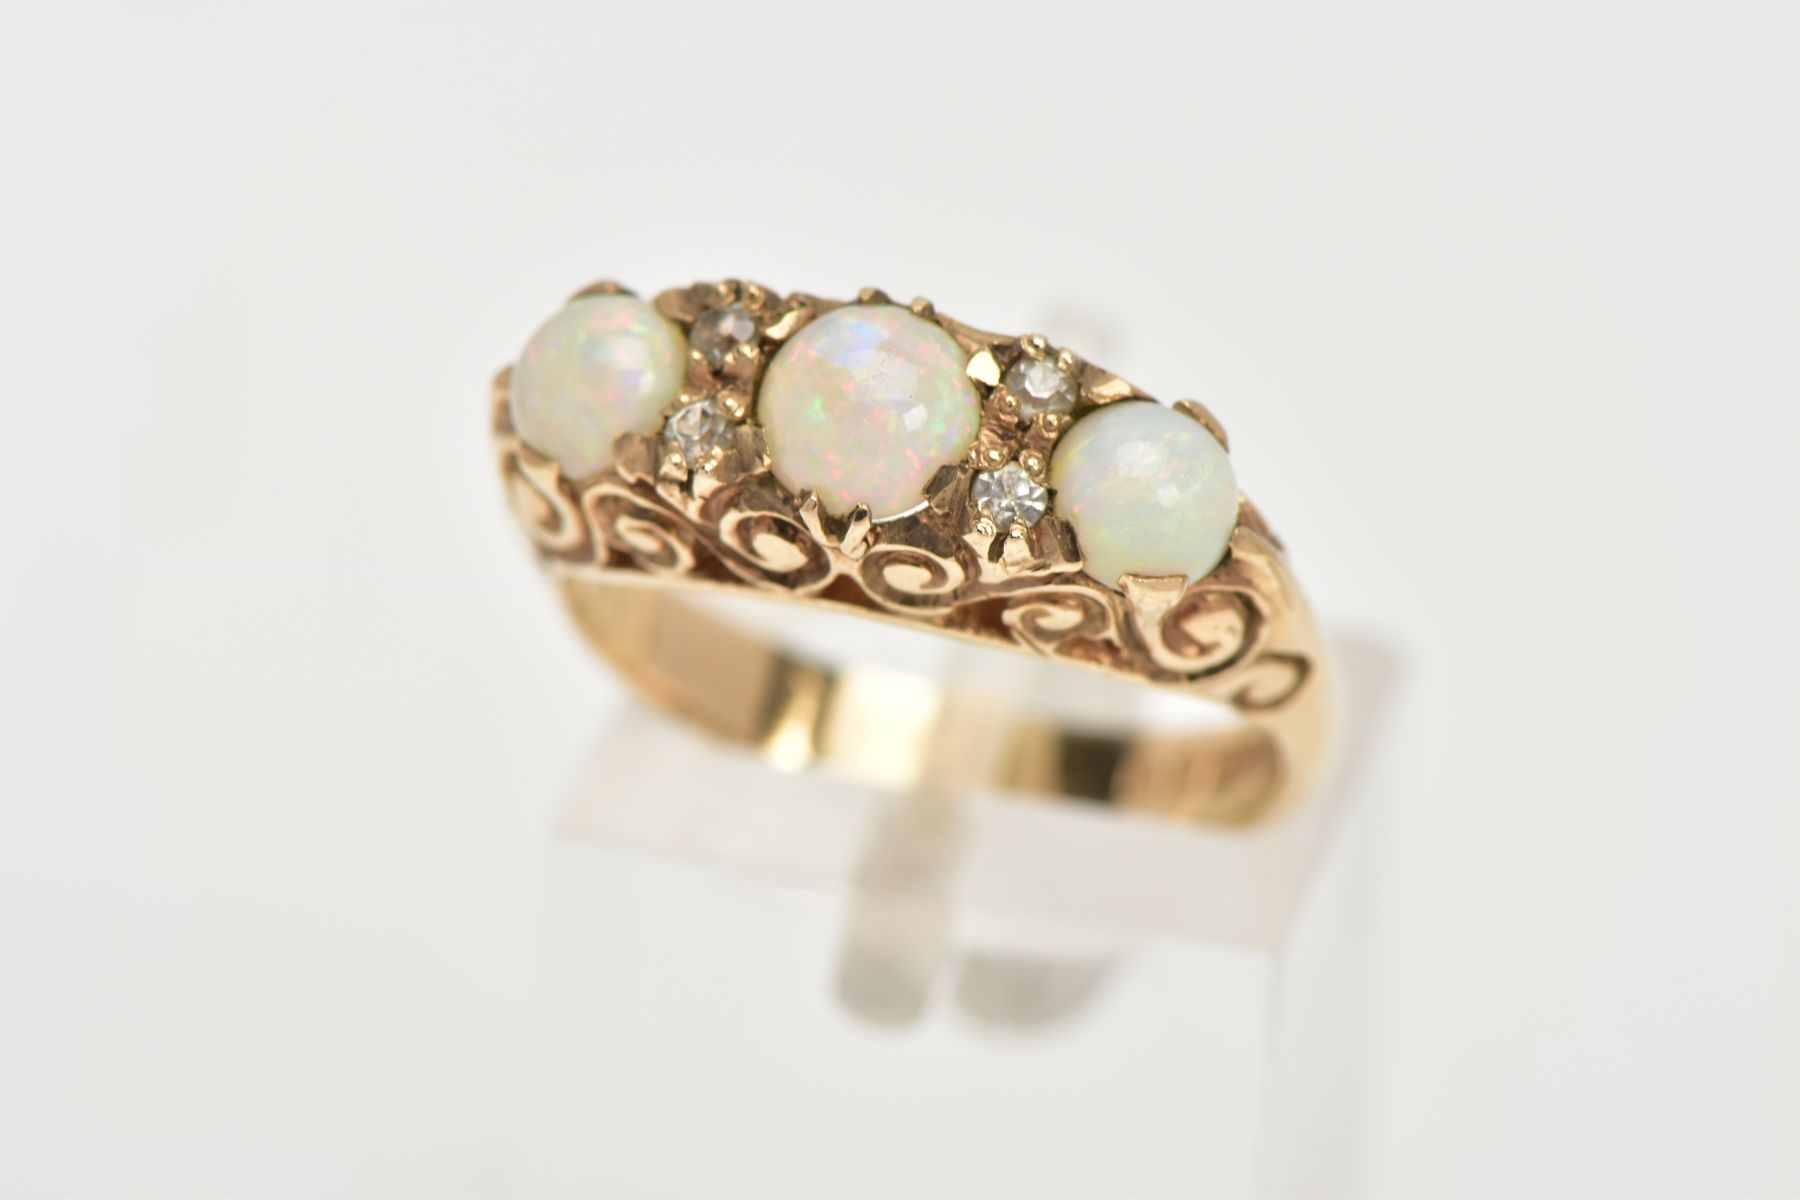 A THREE STONE OPAL RING, three circular opals set in a raised mount with scrolling detail,